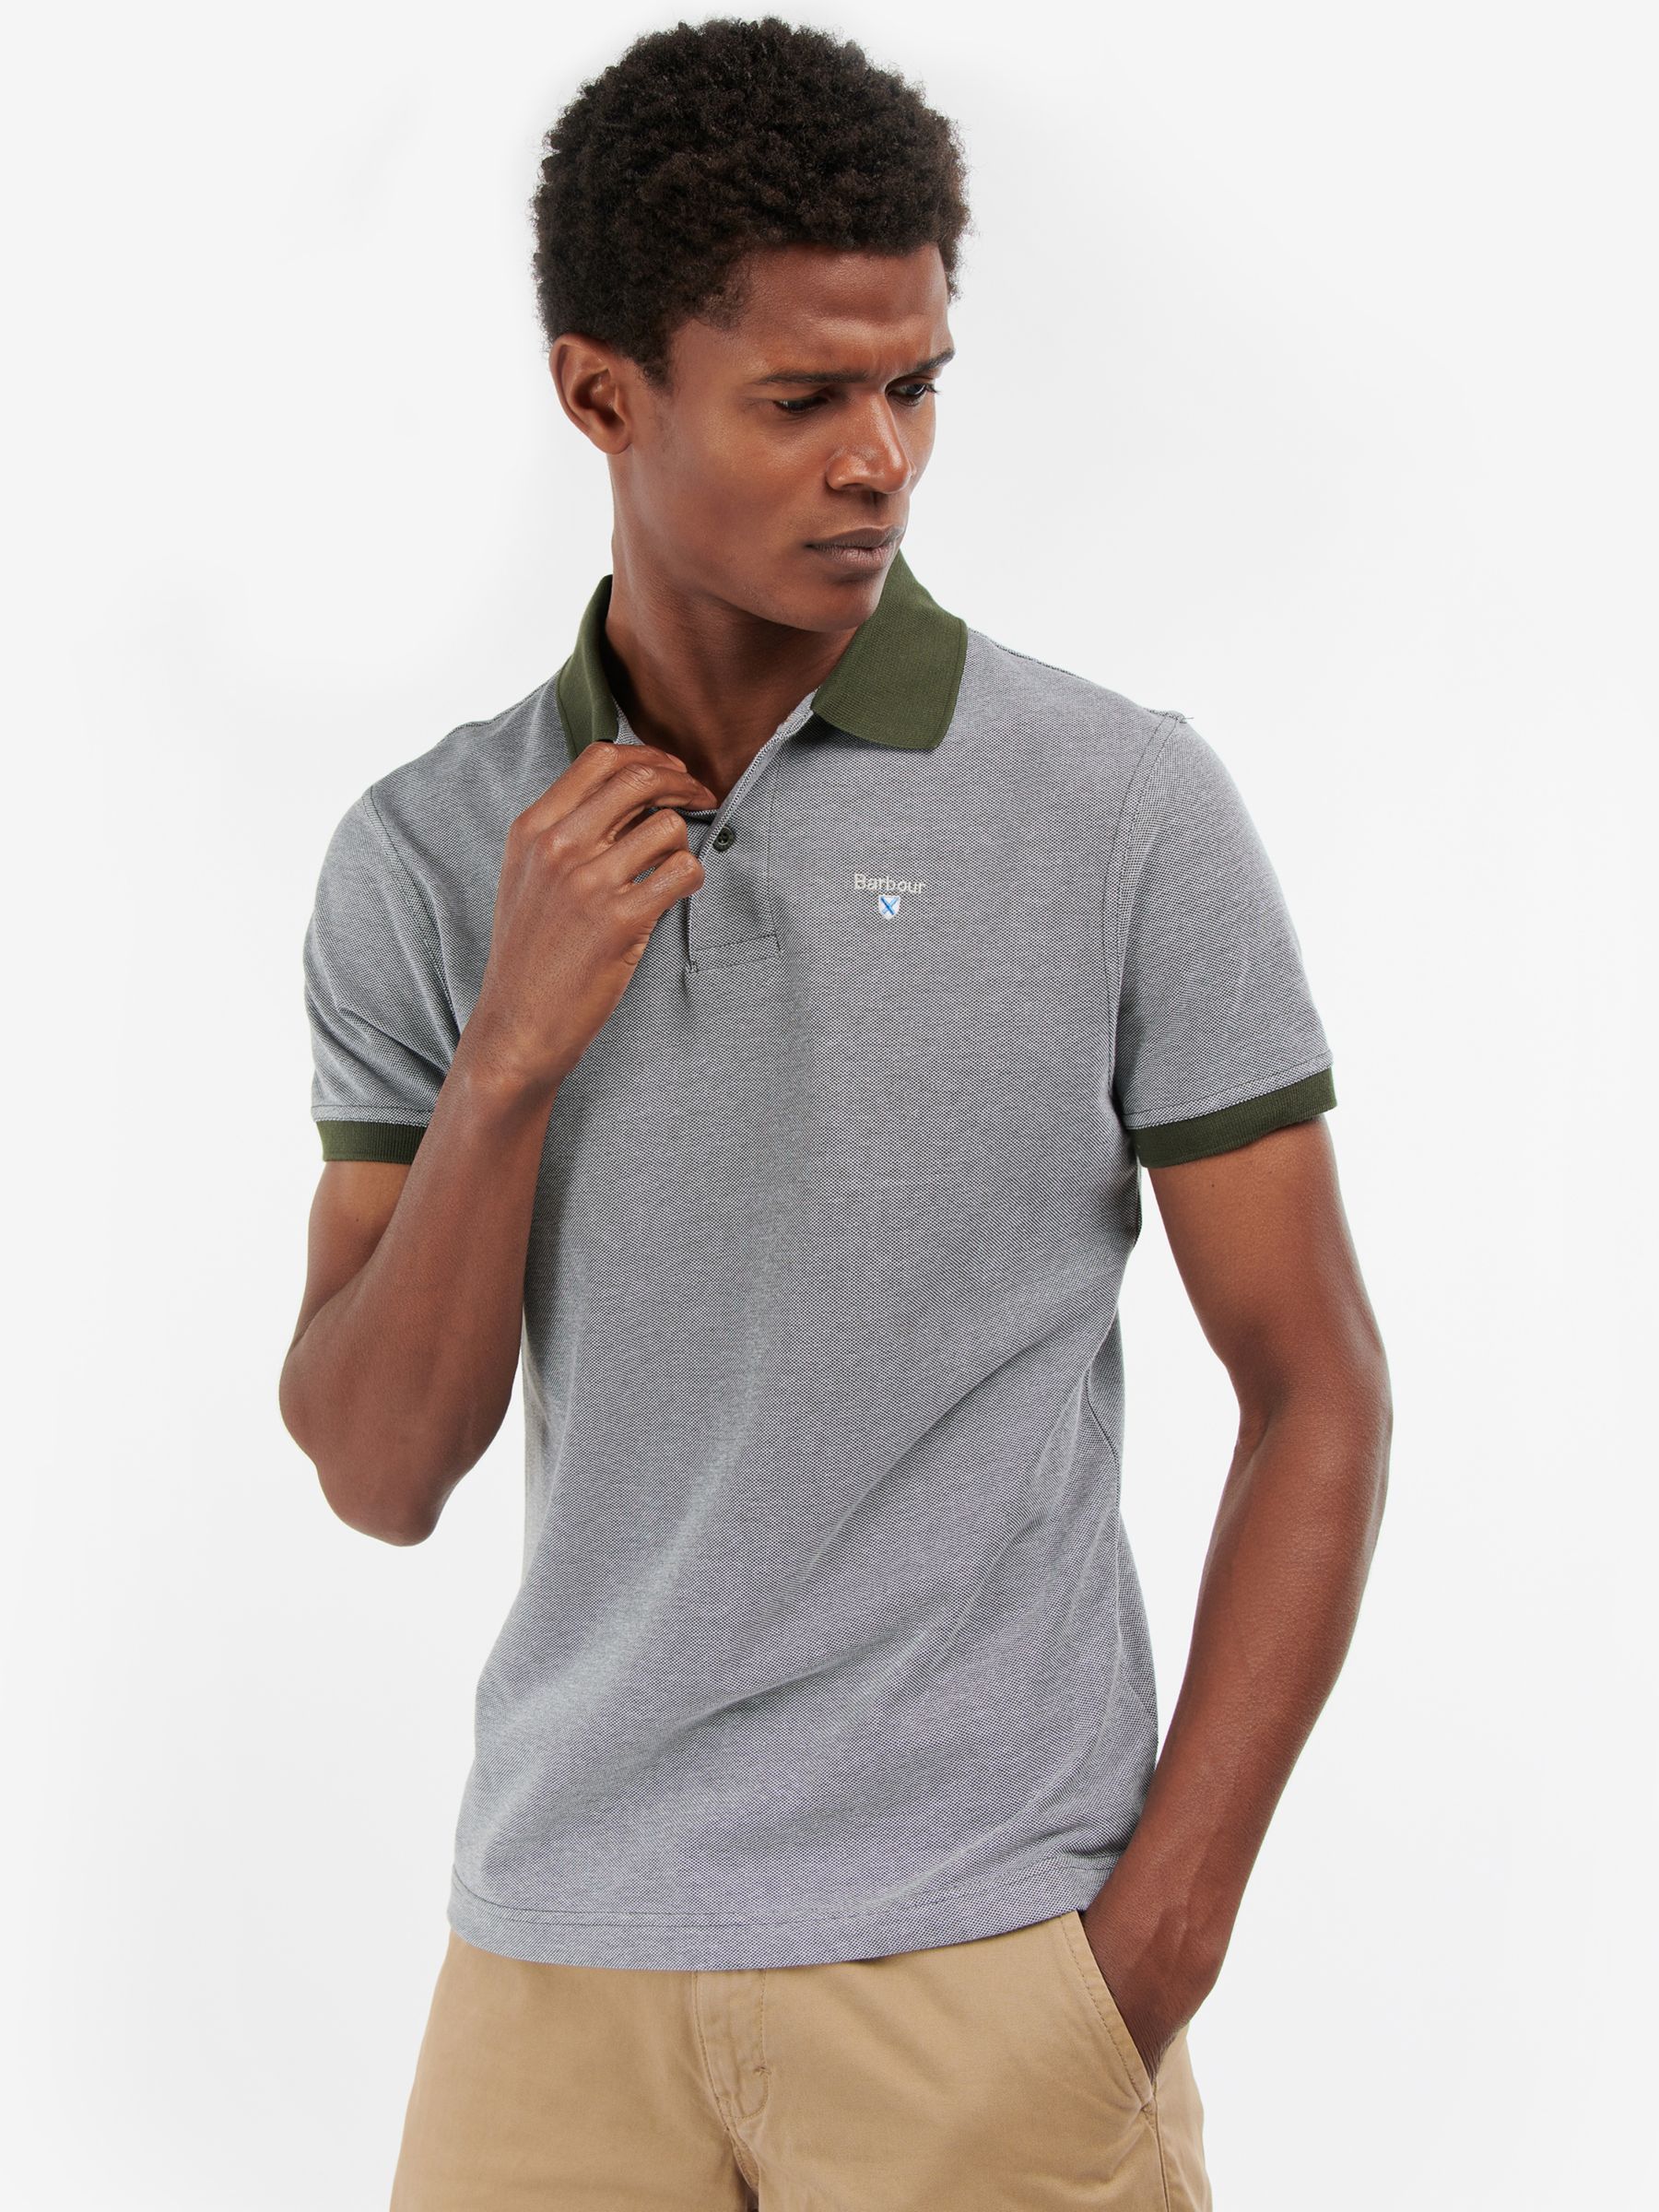 Barbour Sports Pique Polo Mix Shirt, Dark Olive at John Lewis & Partners